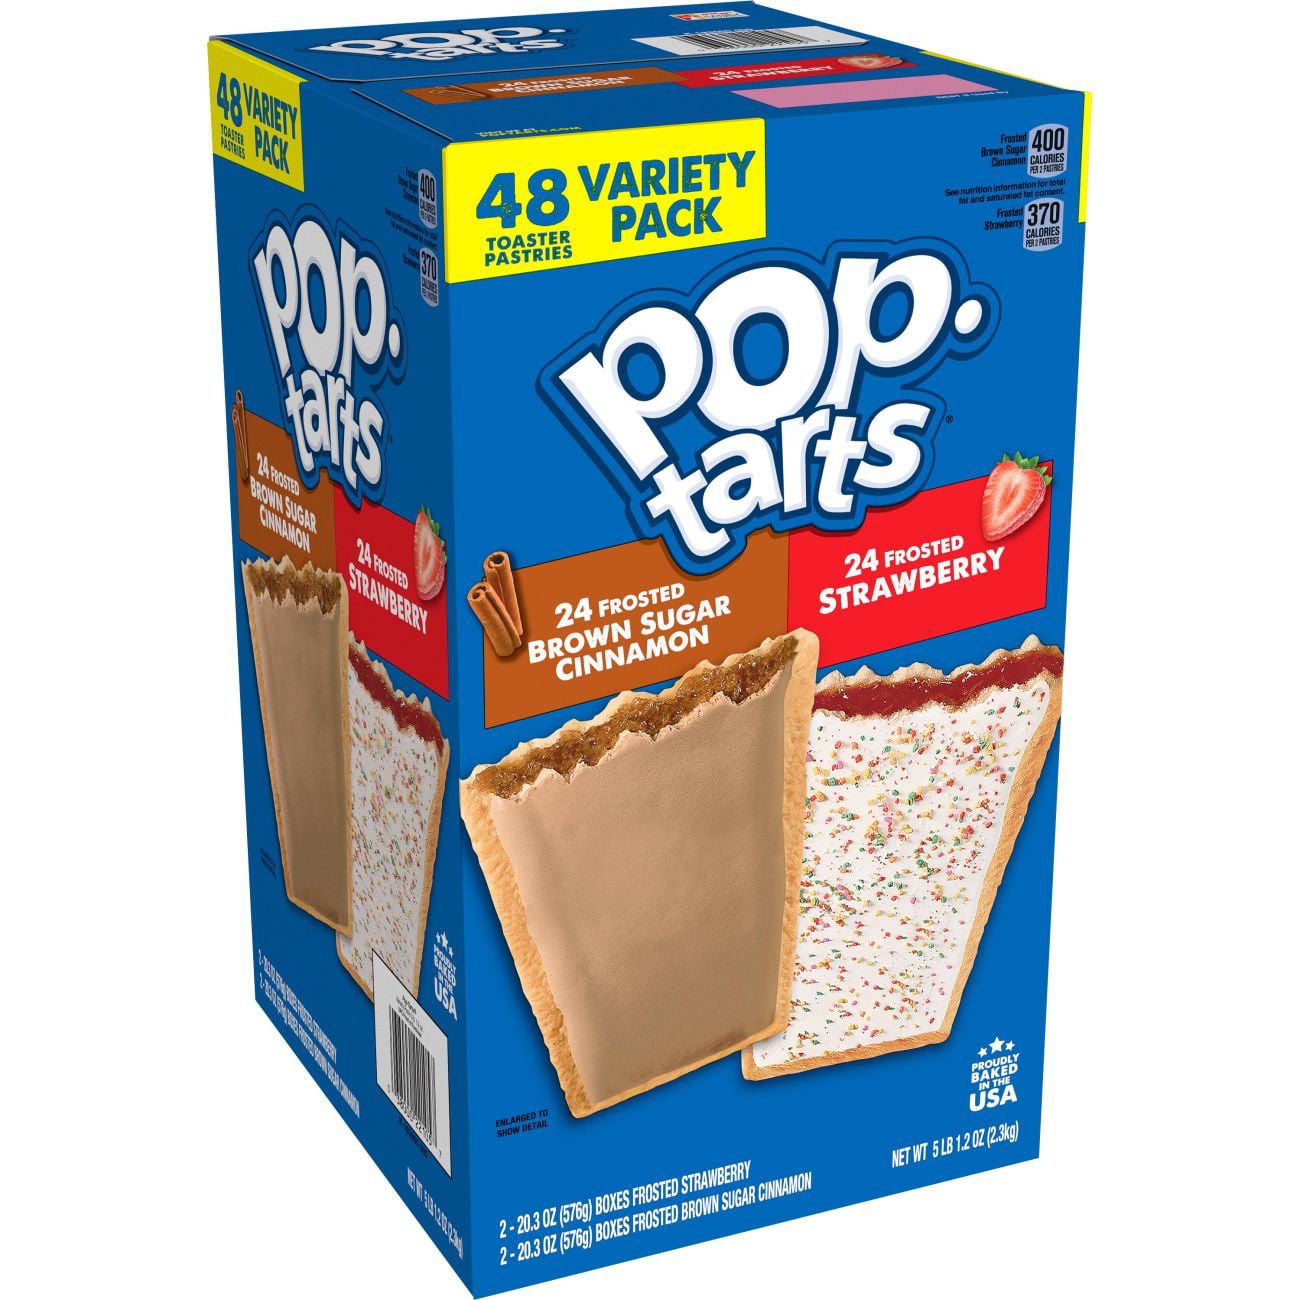 Pop Tarts Frosted Variety Pack 48 Toaster Pastries 24 Frosted